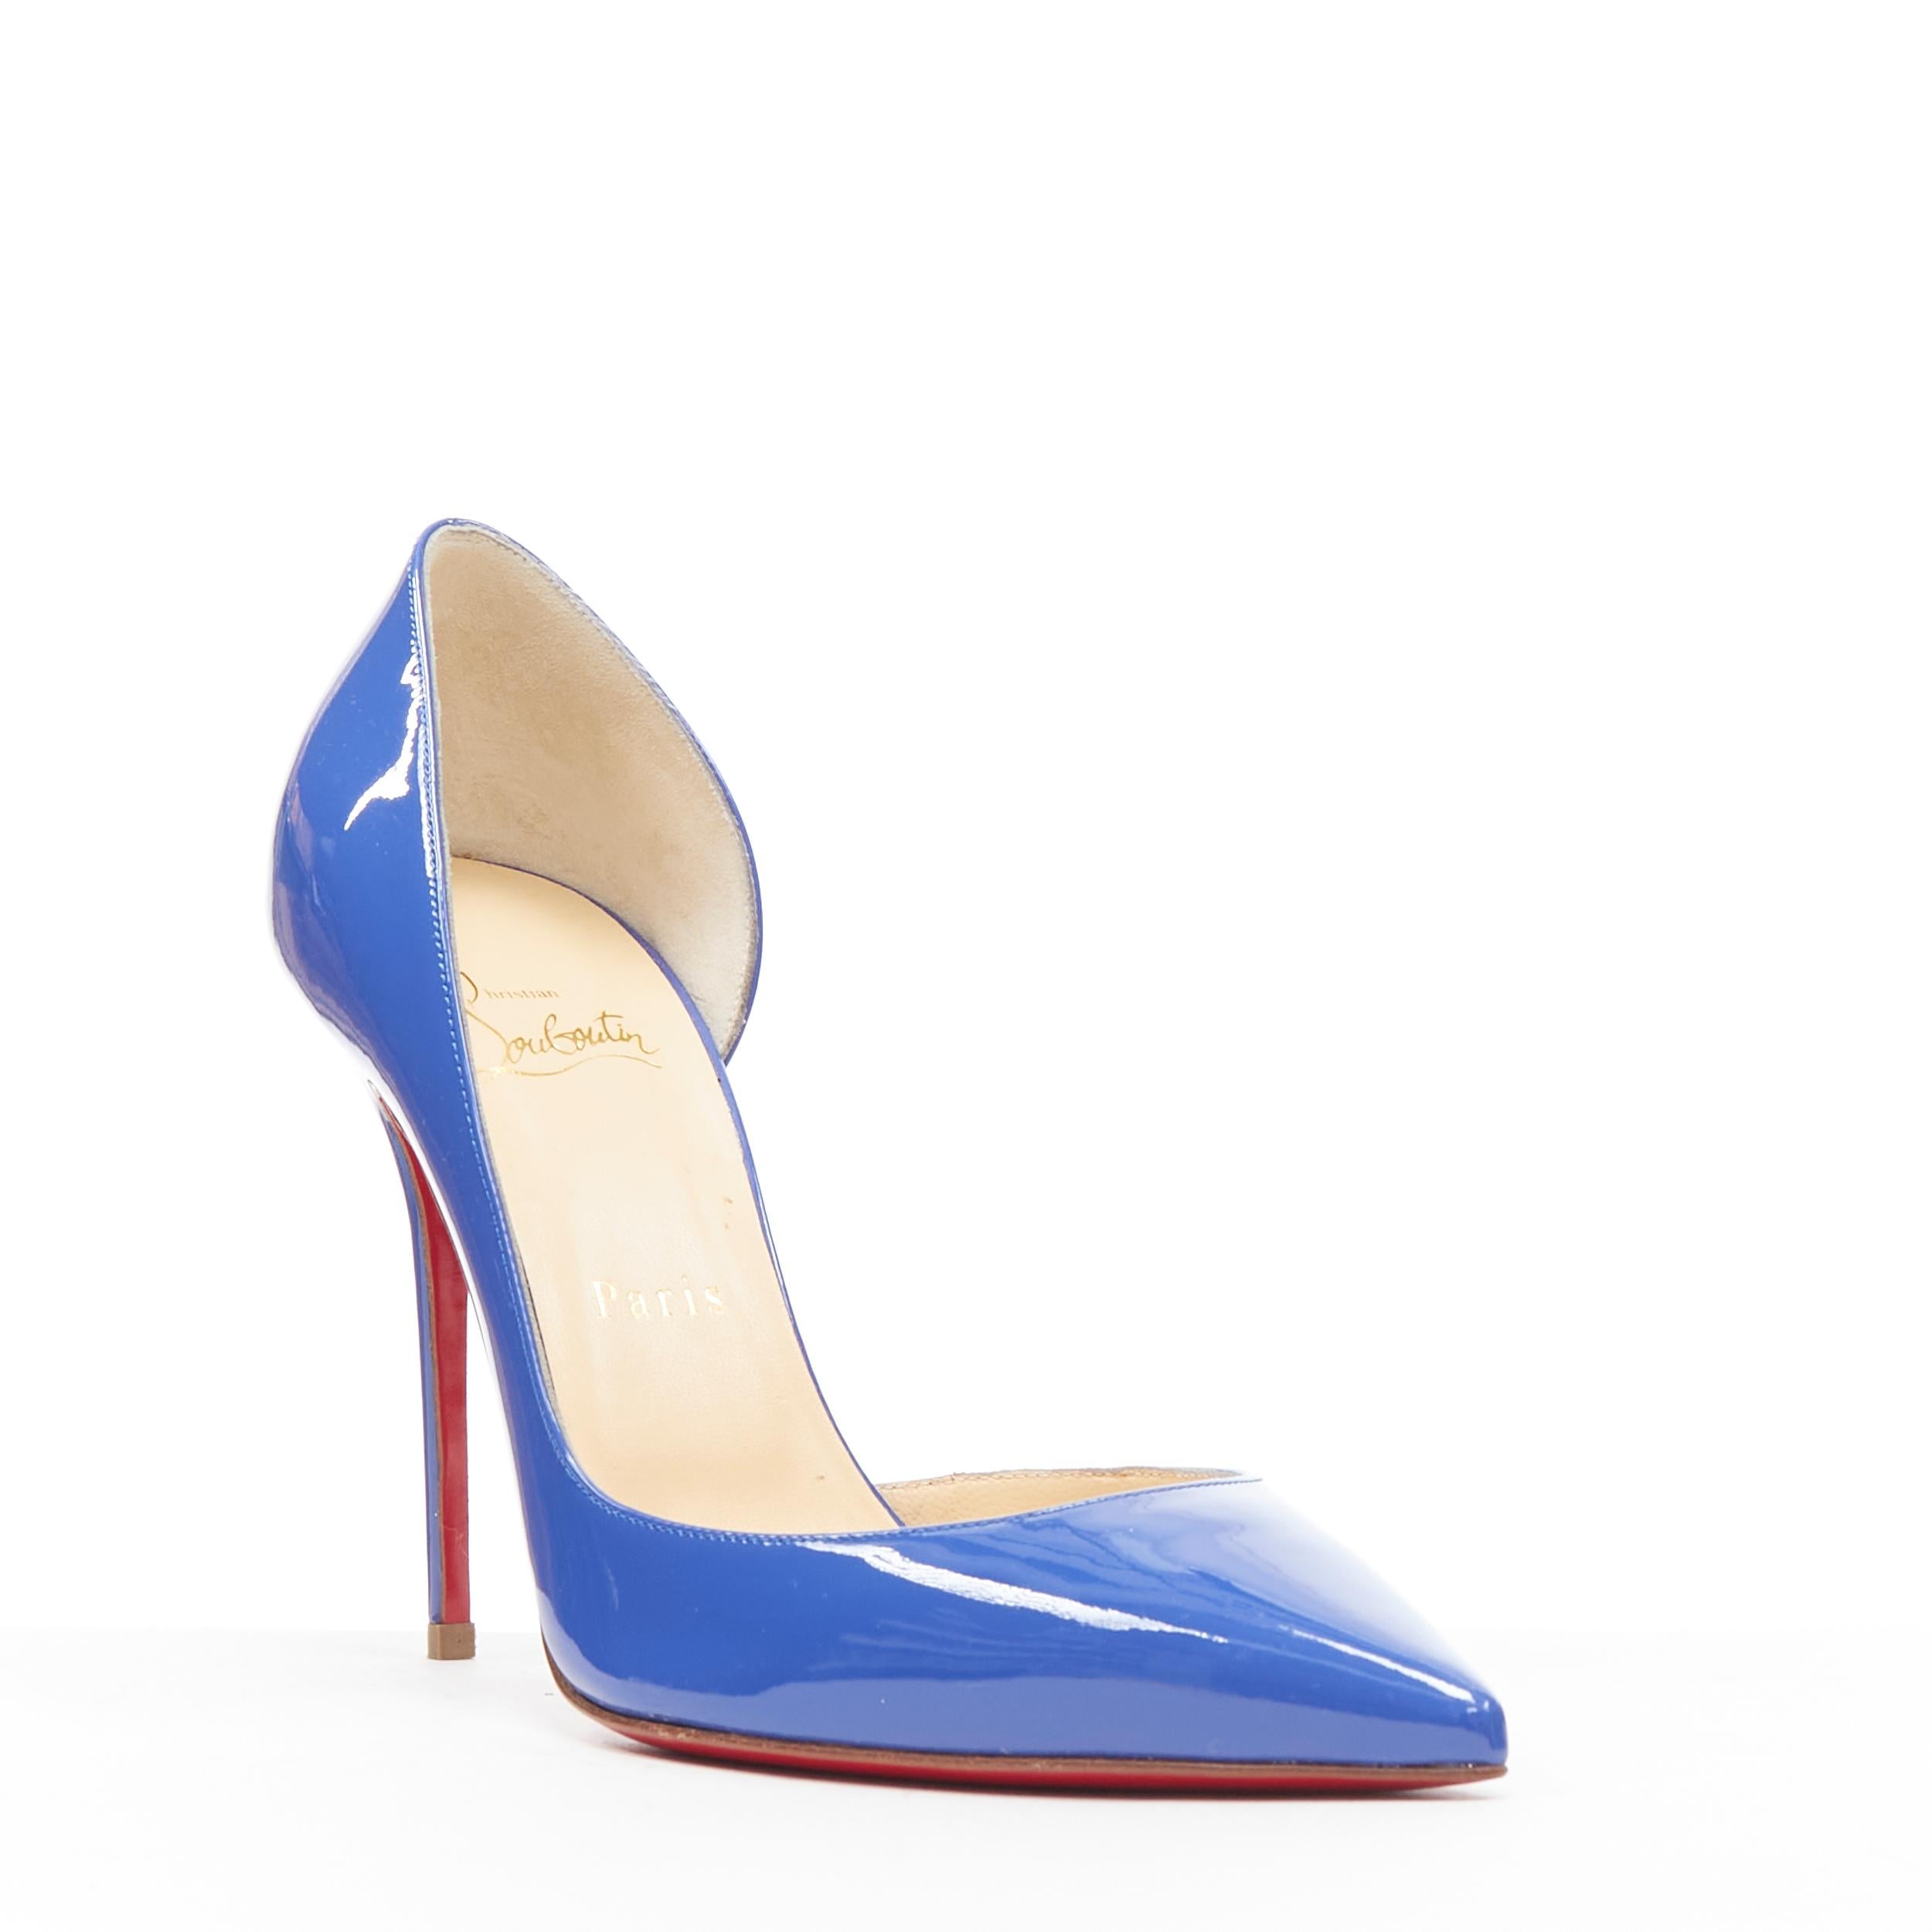 new CHRISTIAN LOUBOUTIN Iriza 110 blue patent half dorsay pointy pump EU39 
Reference: TGAS/B00145 
Brand: Christian Louboutin 
Designer: Christian Louboutin 
Model: Iriza 110 
Material: Patent leather 
Color: Blue 
Pattern: Solid Extra 
Detail: